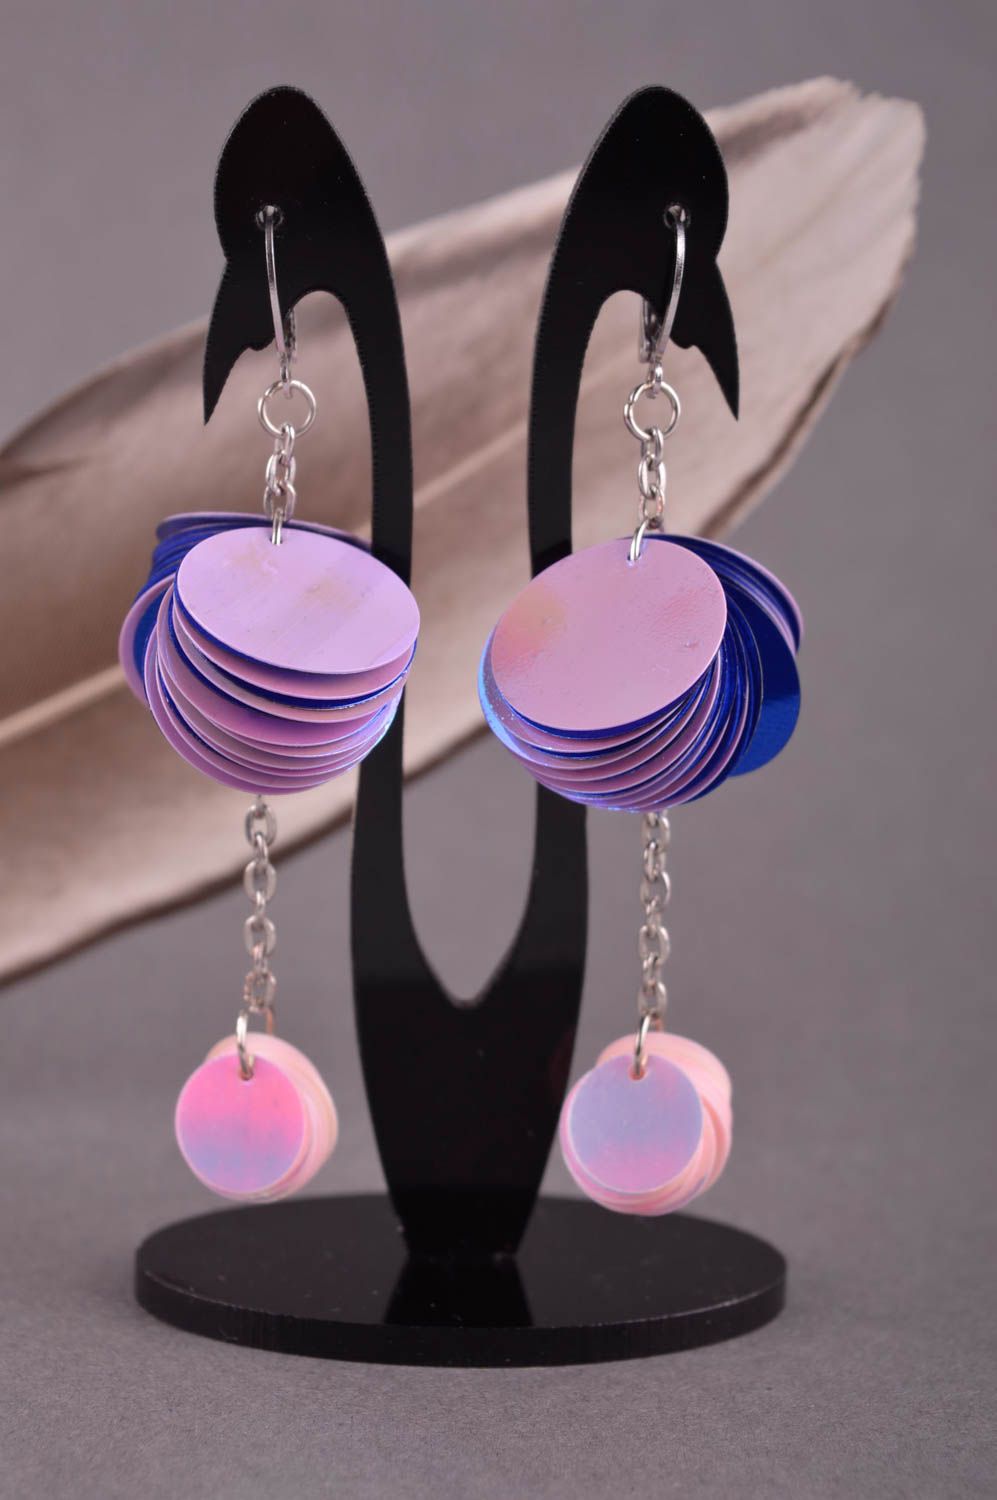 Plastic earrings trendy earrings with charms handmade plastic jewelry for girls photo 1